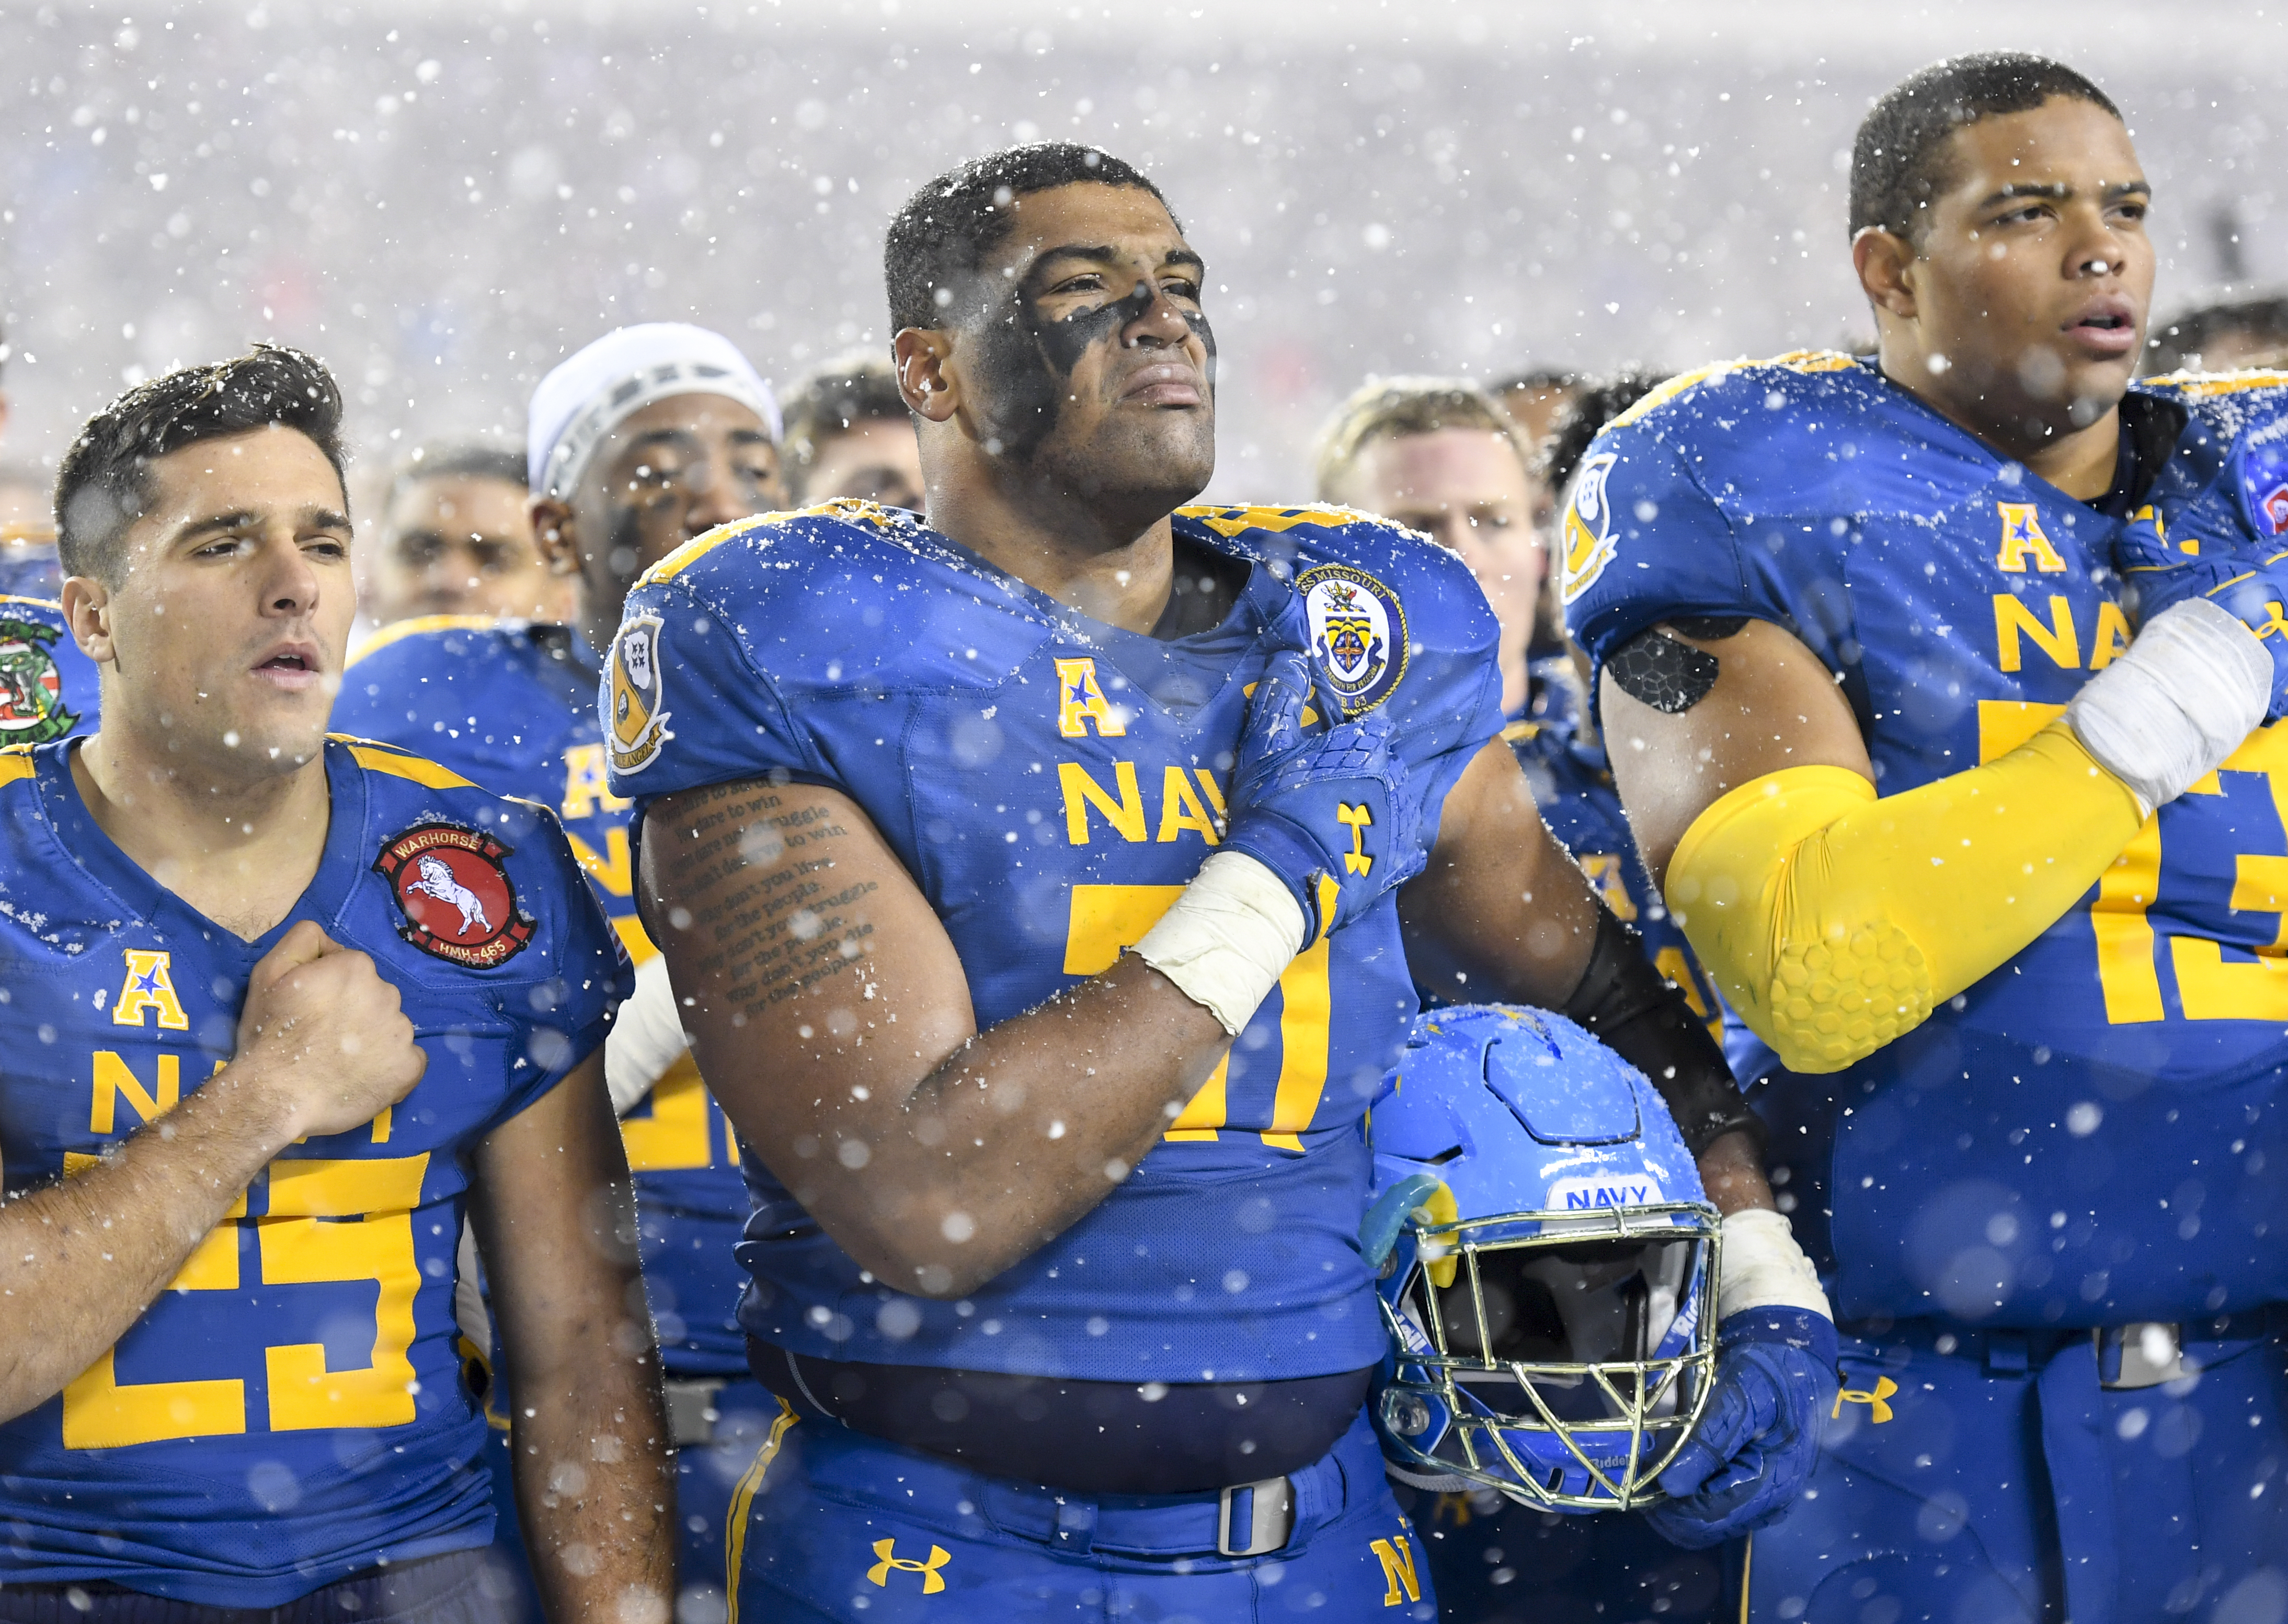 Army, Navy set for showdown in snowy Philly – Daily Local